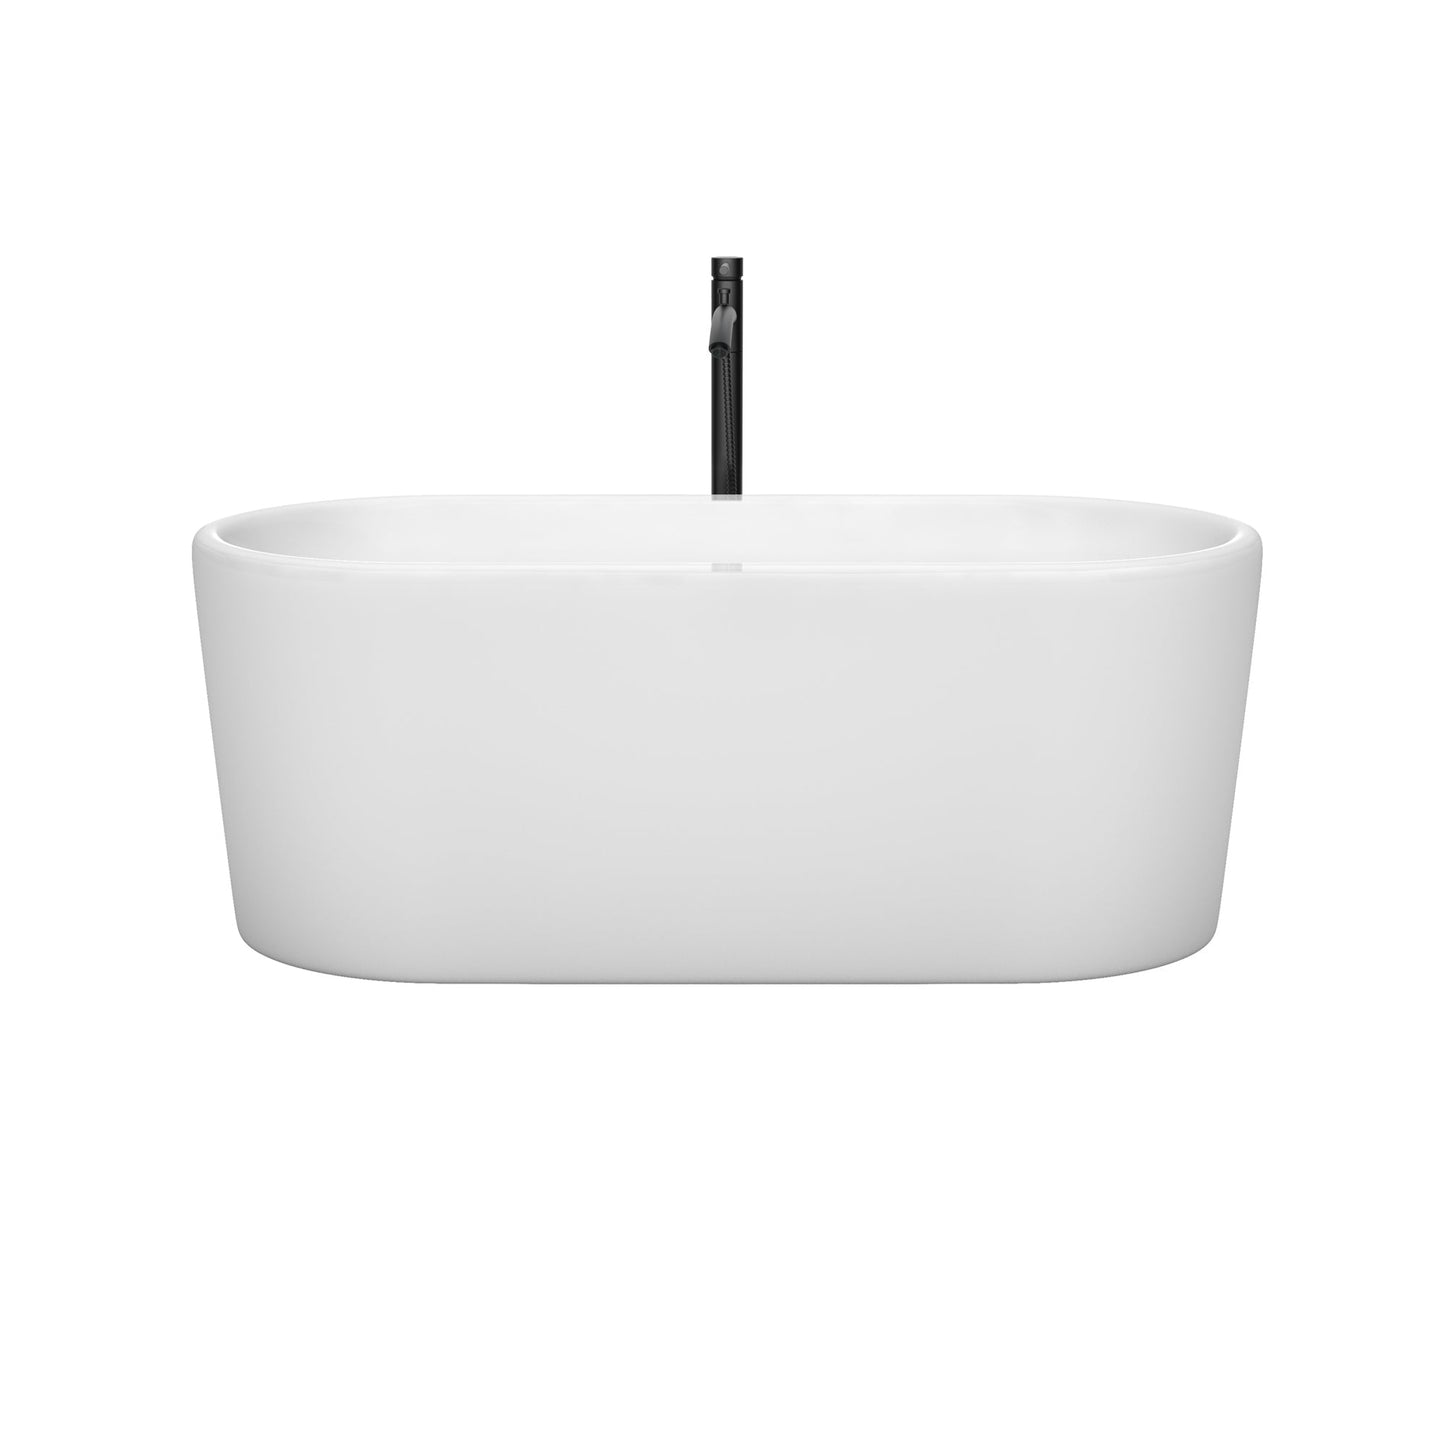 Wyndham Collection Ursula 59" Freestanding Bathtub in White With Shiny White Trim and Floor Mounted Faucet in Matte Black